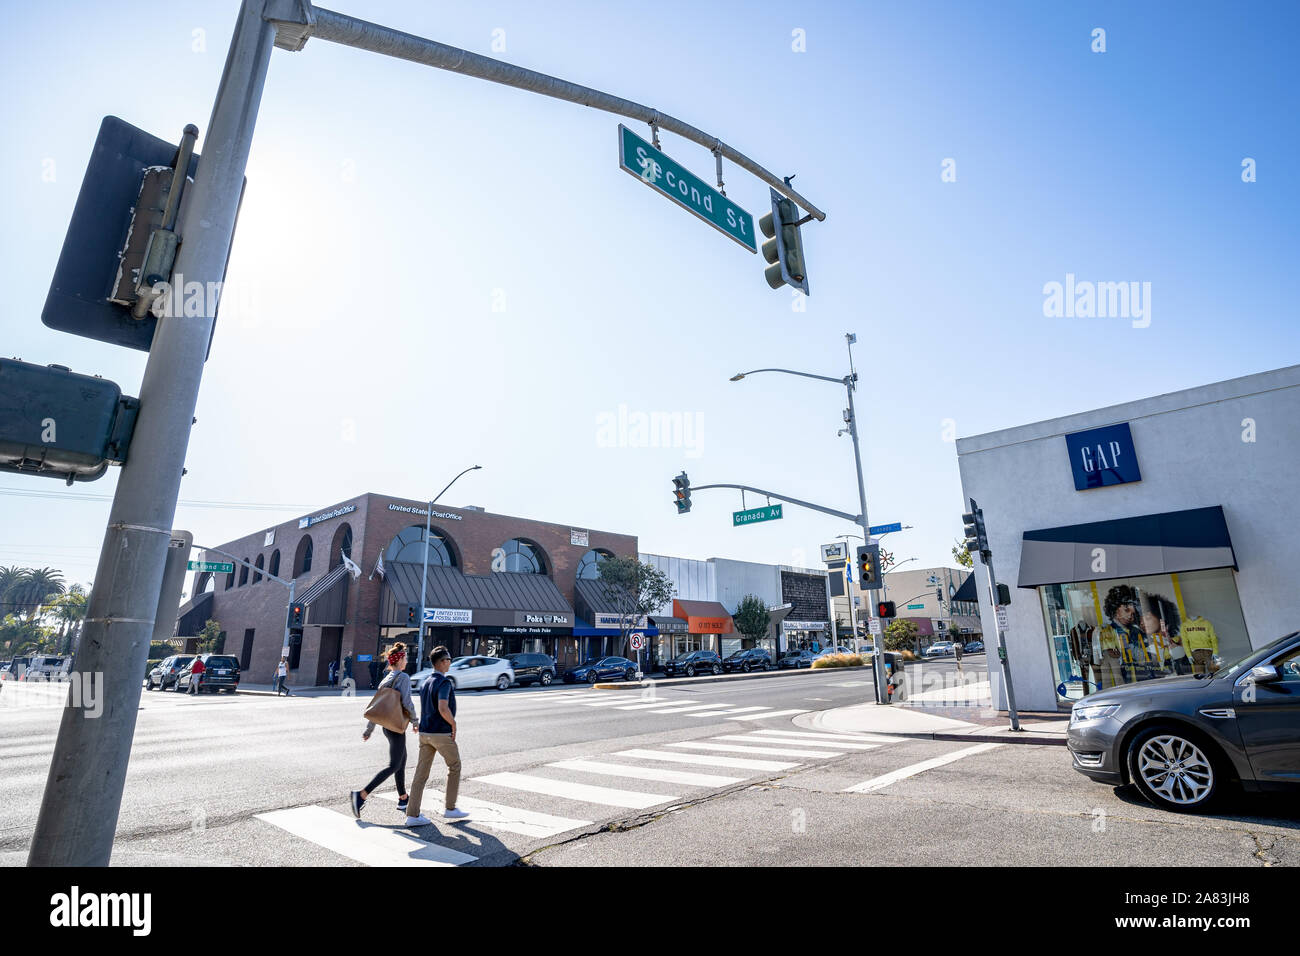 Pedestrians crossing the street on Second Street in Long Beach Stock Photo